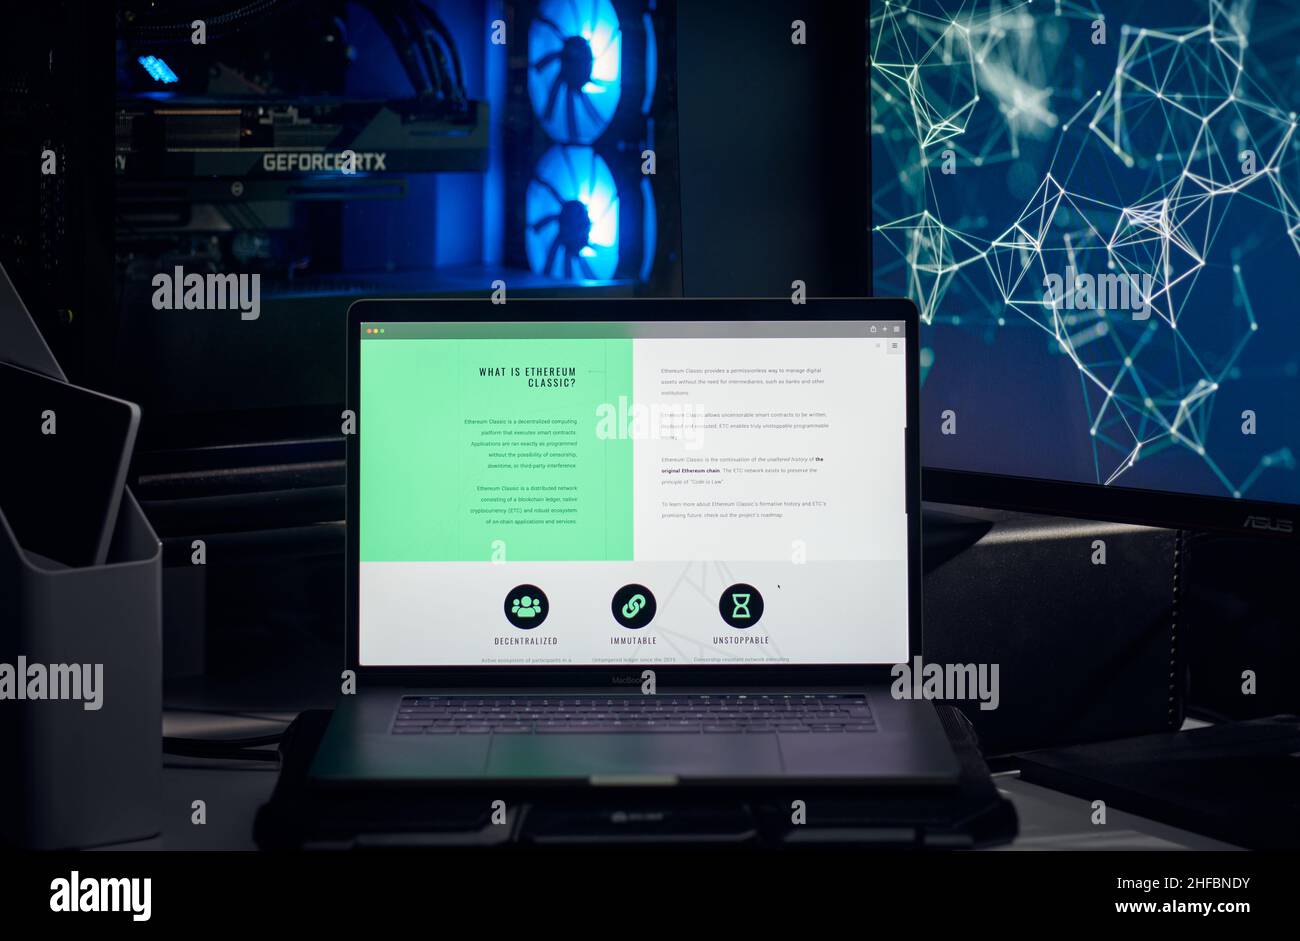 Milan, Italy - January 11, 2022: ethereum classic - ETC website's hp seen on a laptop screen. ethereum classic, ETC coin logo visible. Cryptocurrency, Stock Photo